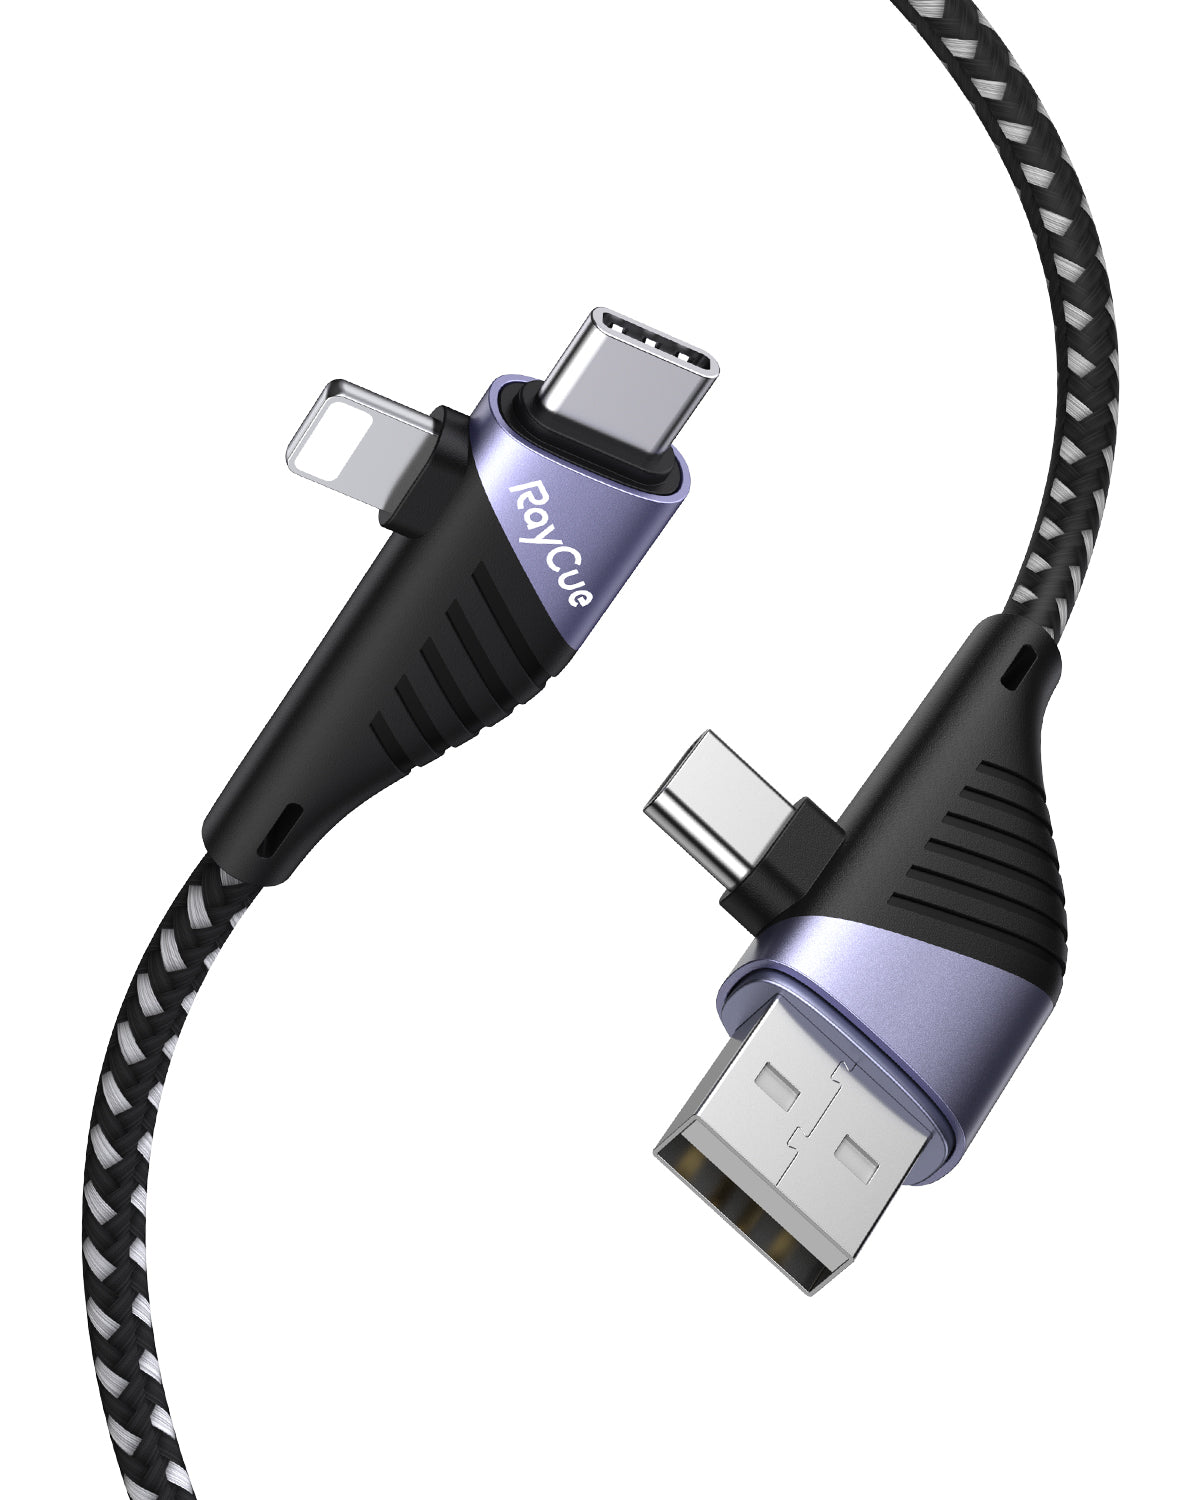 RayCue  BlitzLink Omni 1.2M Braided Multifunctional 4-in-1 Chrage&Sync Cable